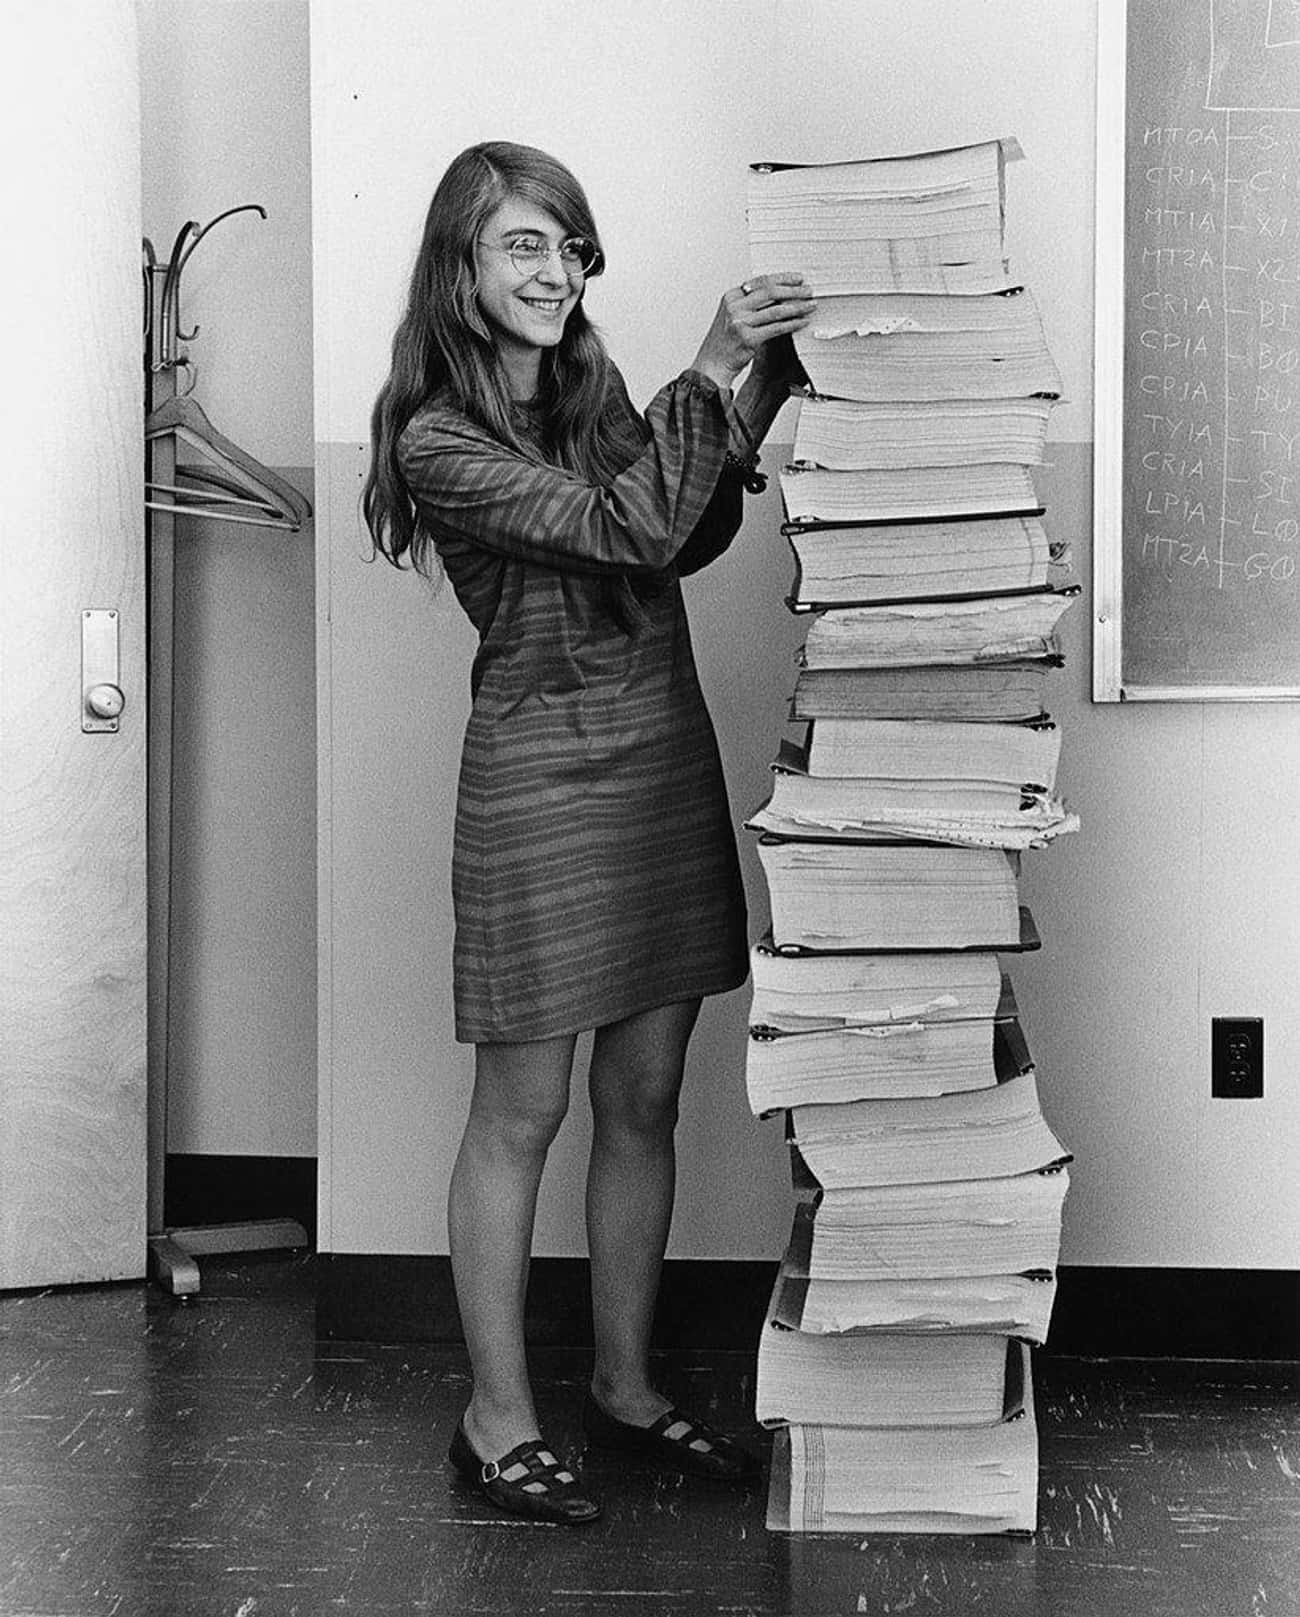 Margaret Hamilton And The Handwritten Navigation Software She And Her MIT Team Produced For The Apollo Project